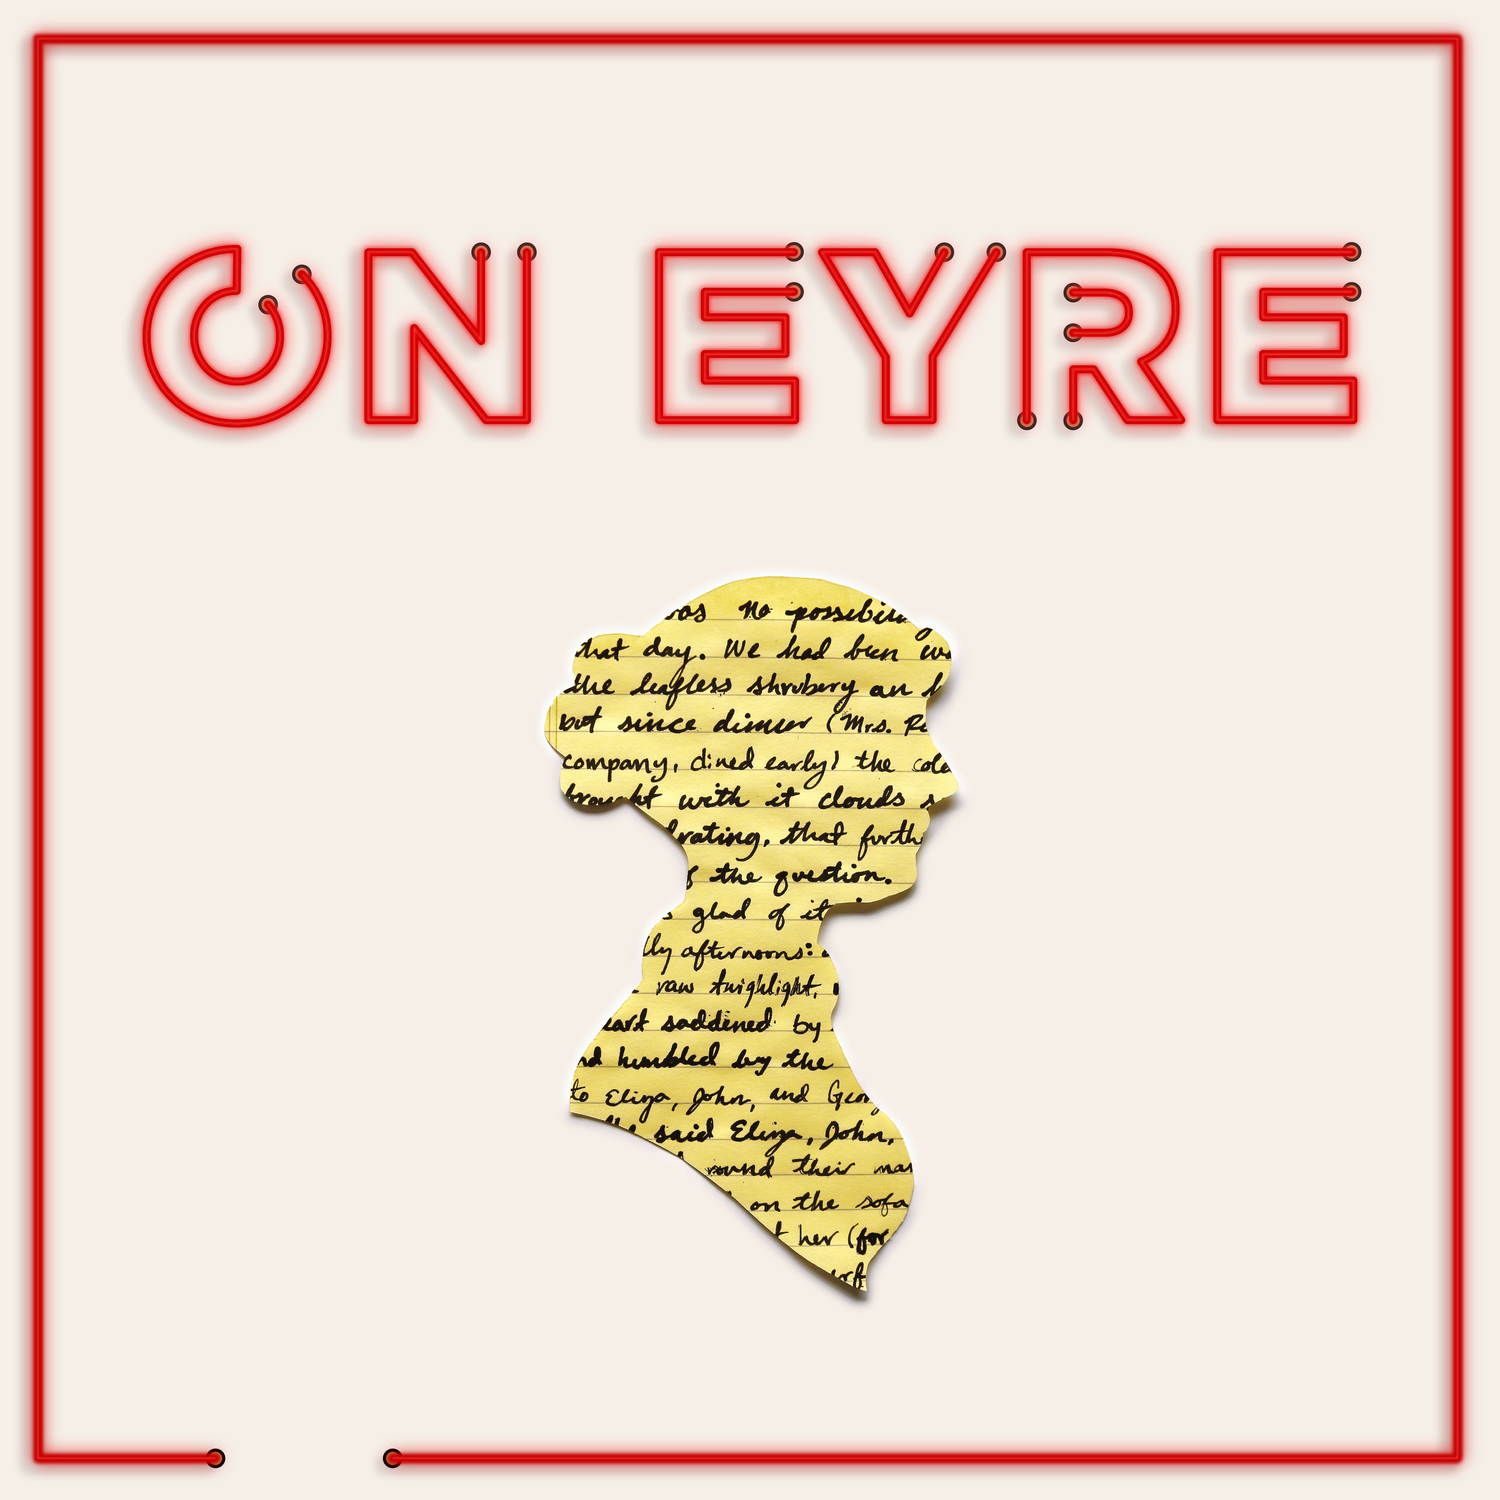 On Eyre: Re Jane